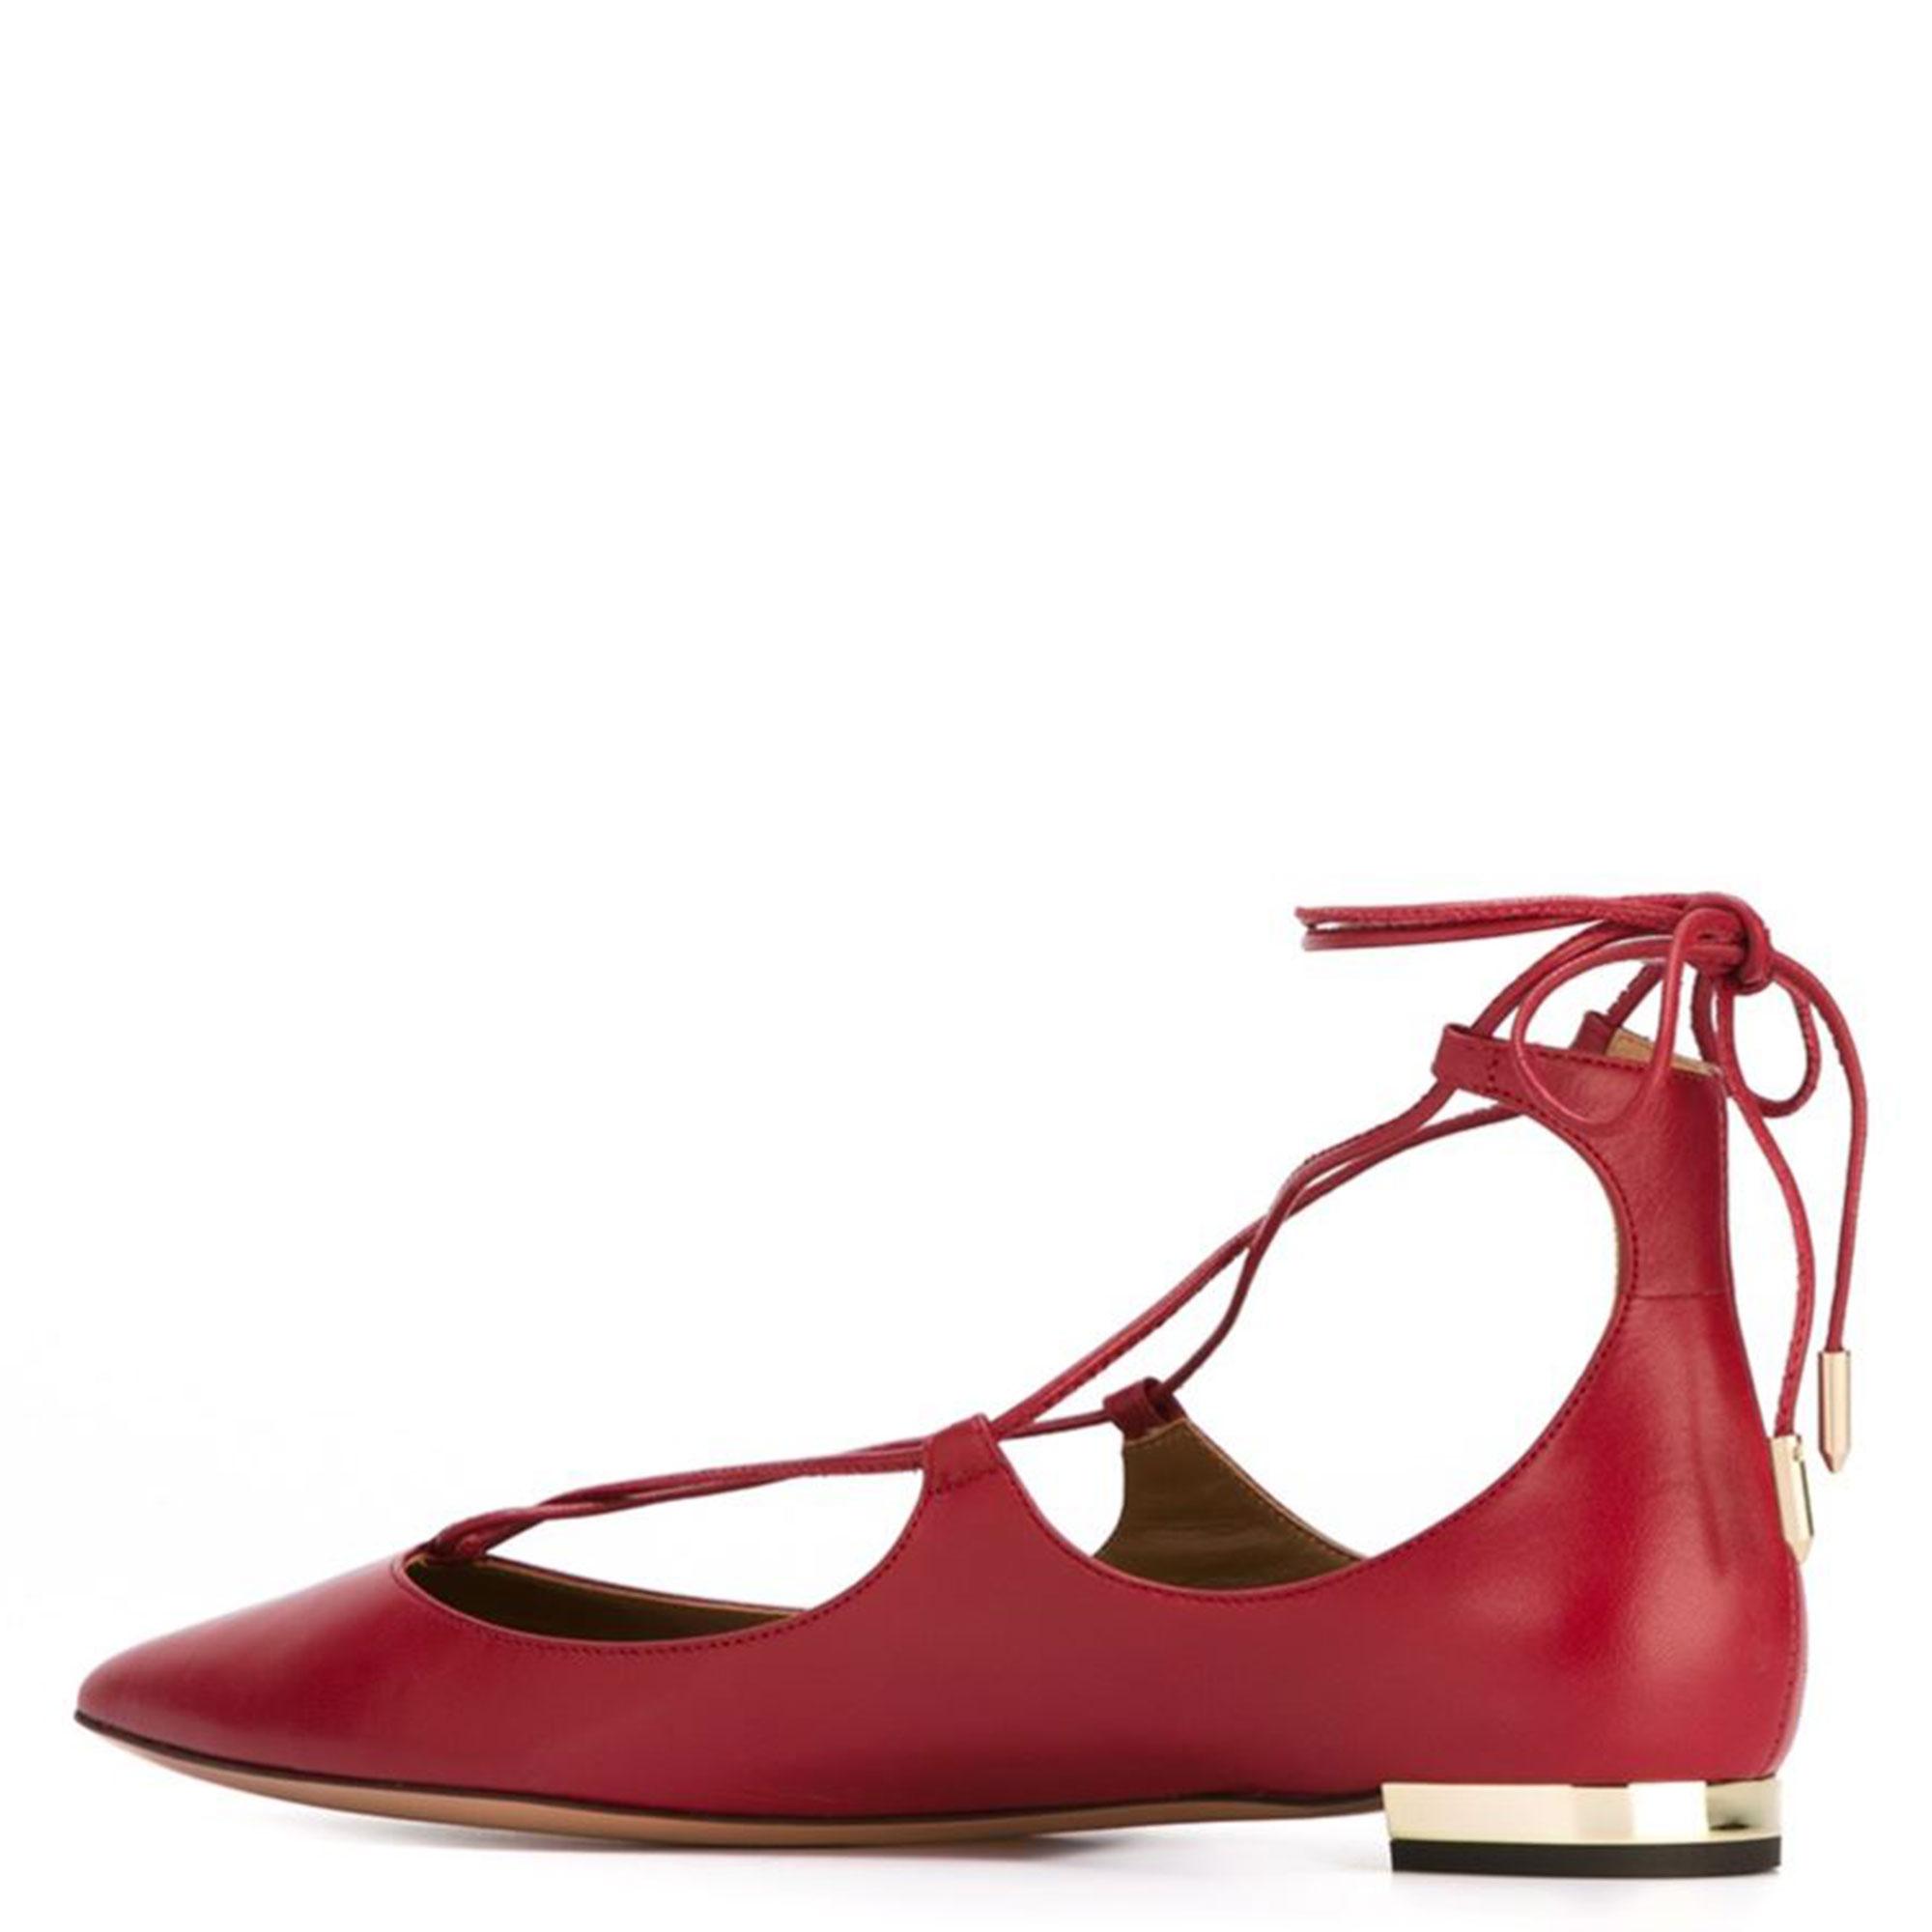 Lyst - Aquazzura Leather Ballet Flats in Red